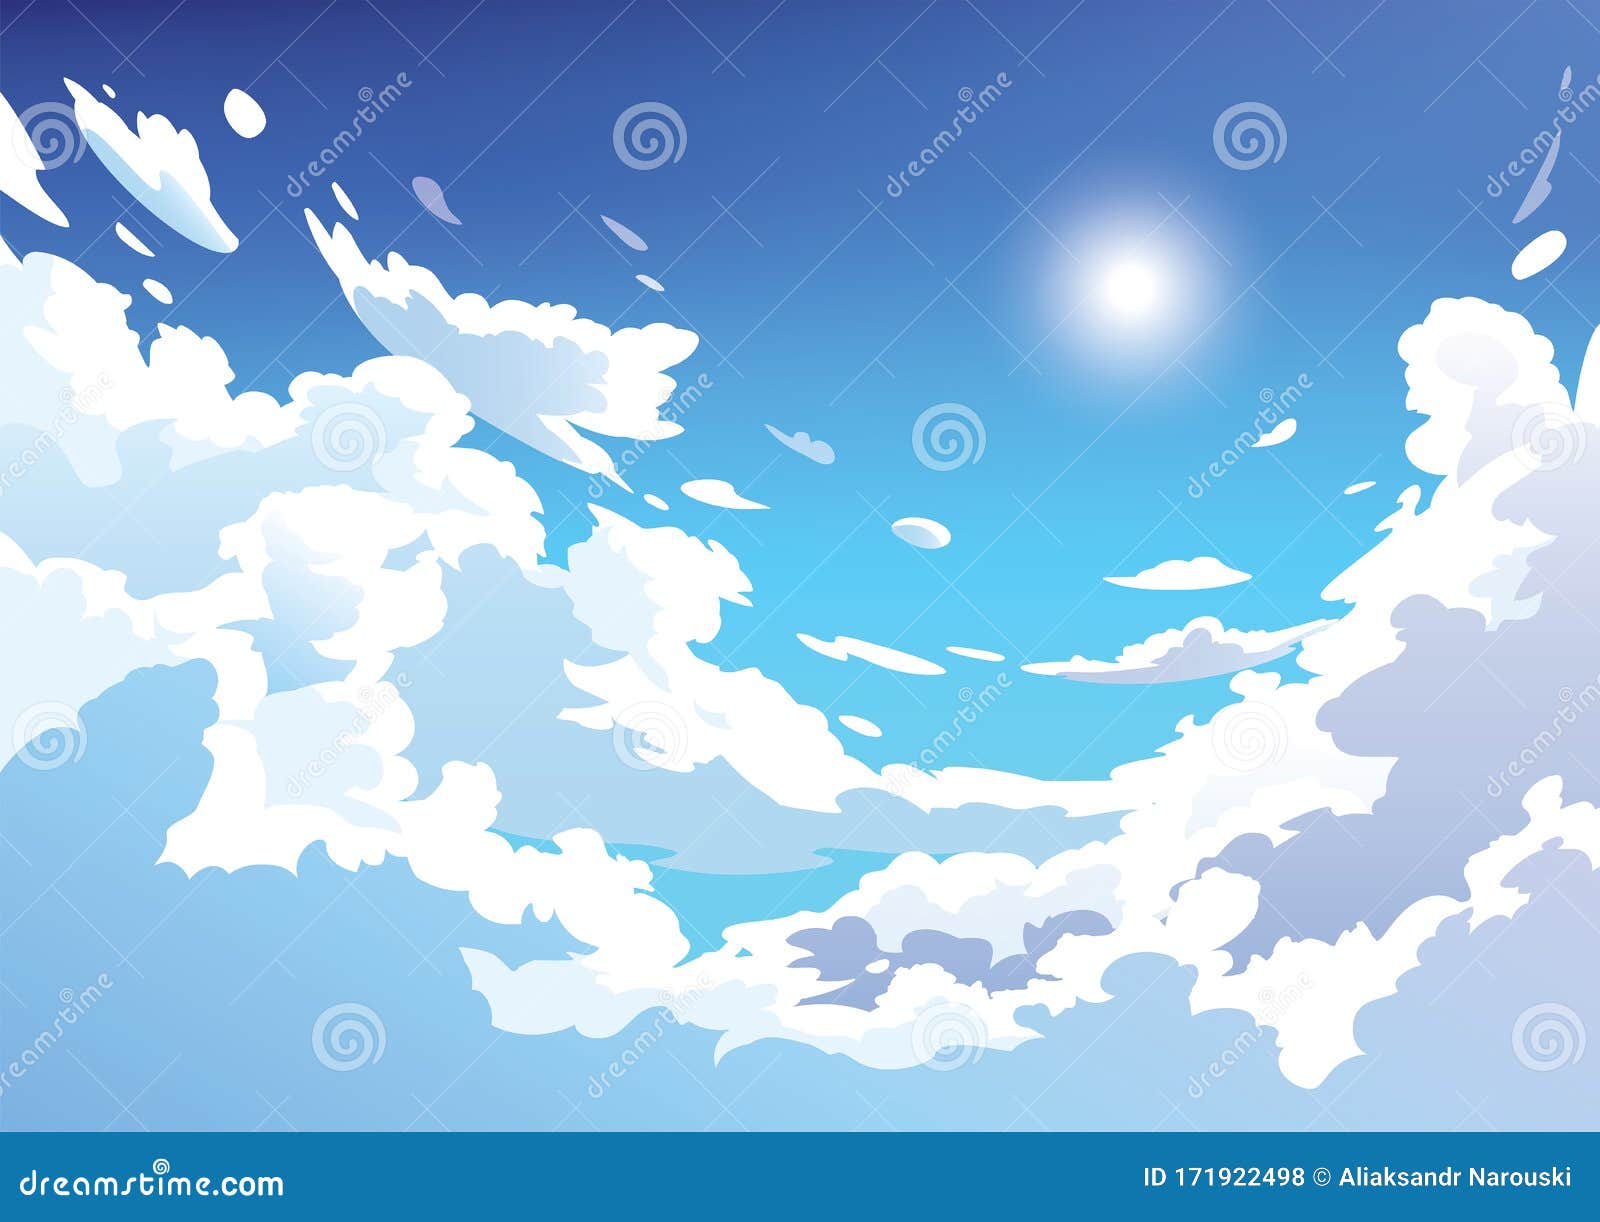 11,153 Anime Sky Background Images, Stock Photos, 3D objects, & Vectors |  Shutterstock